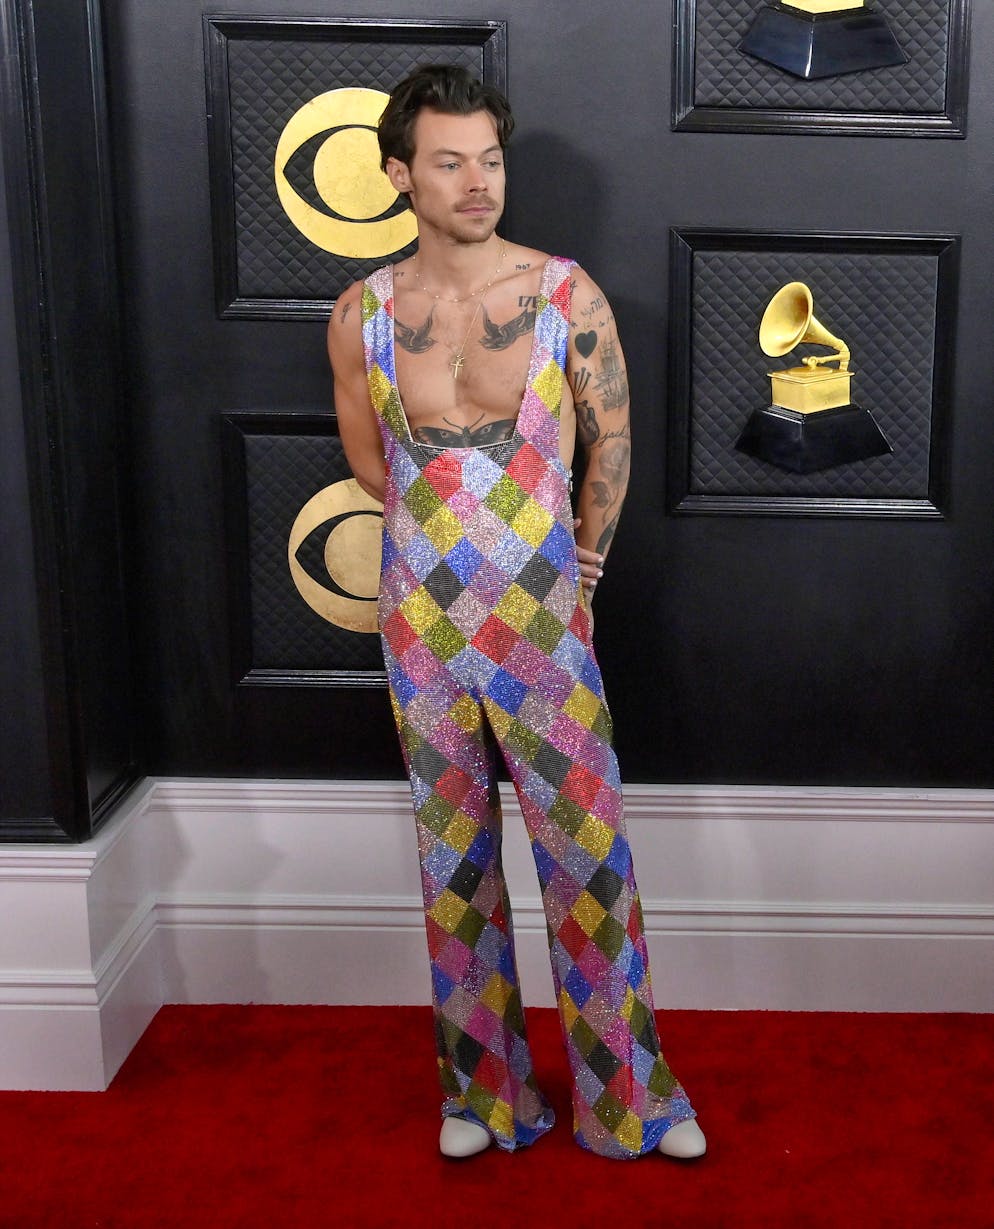 Harry Styles attends the 65th annual Grammy Awards at the Crypto.com Arena in Los Angeles on Sunday, February 5, 2023. PUBLICATIONxINxGERxSUIxAUTxHUNxONLY LAP20230205543 JIMxRUYMEN